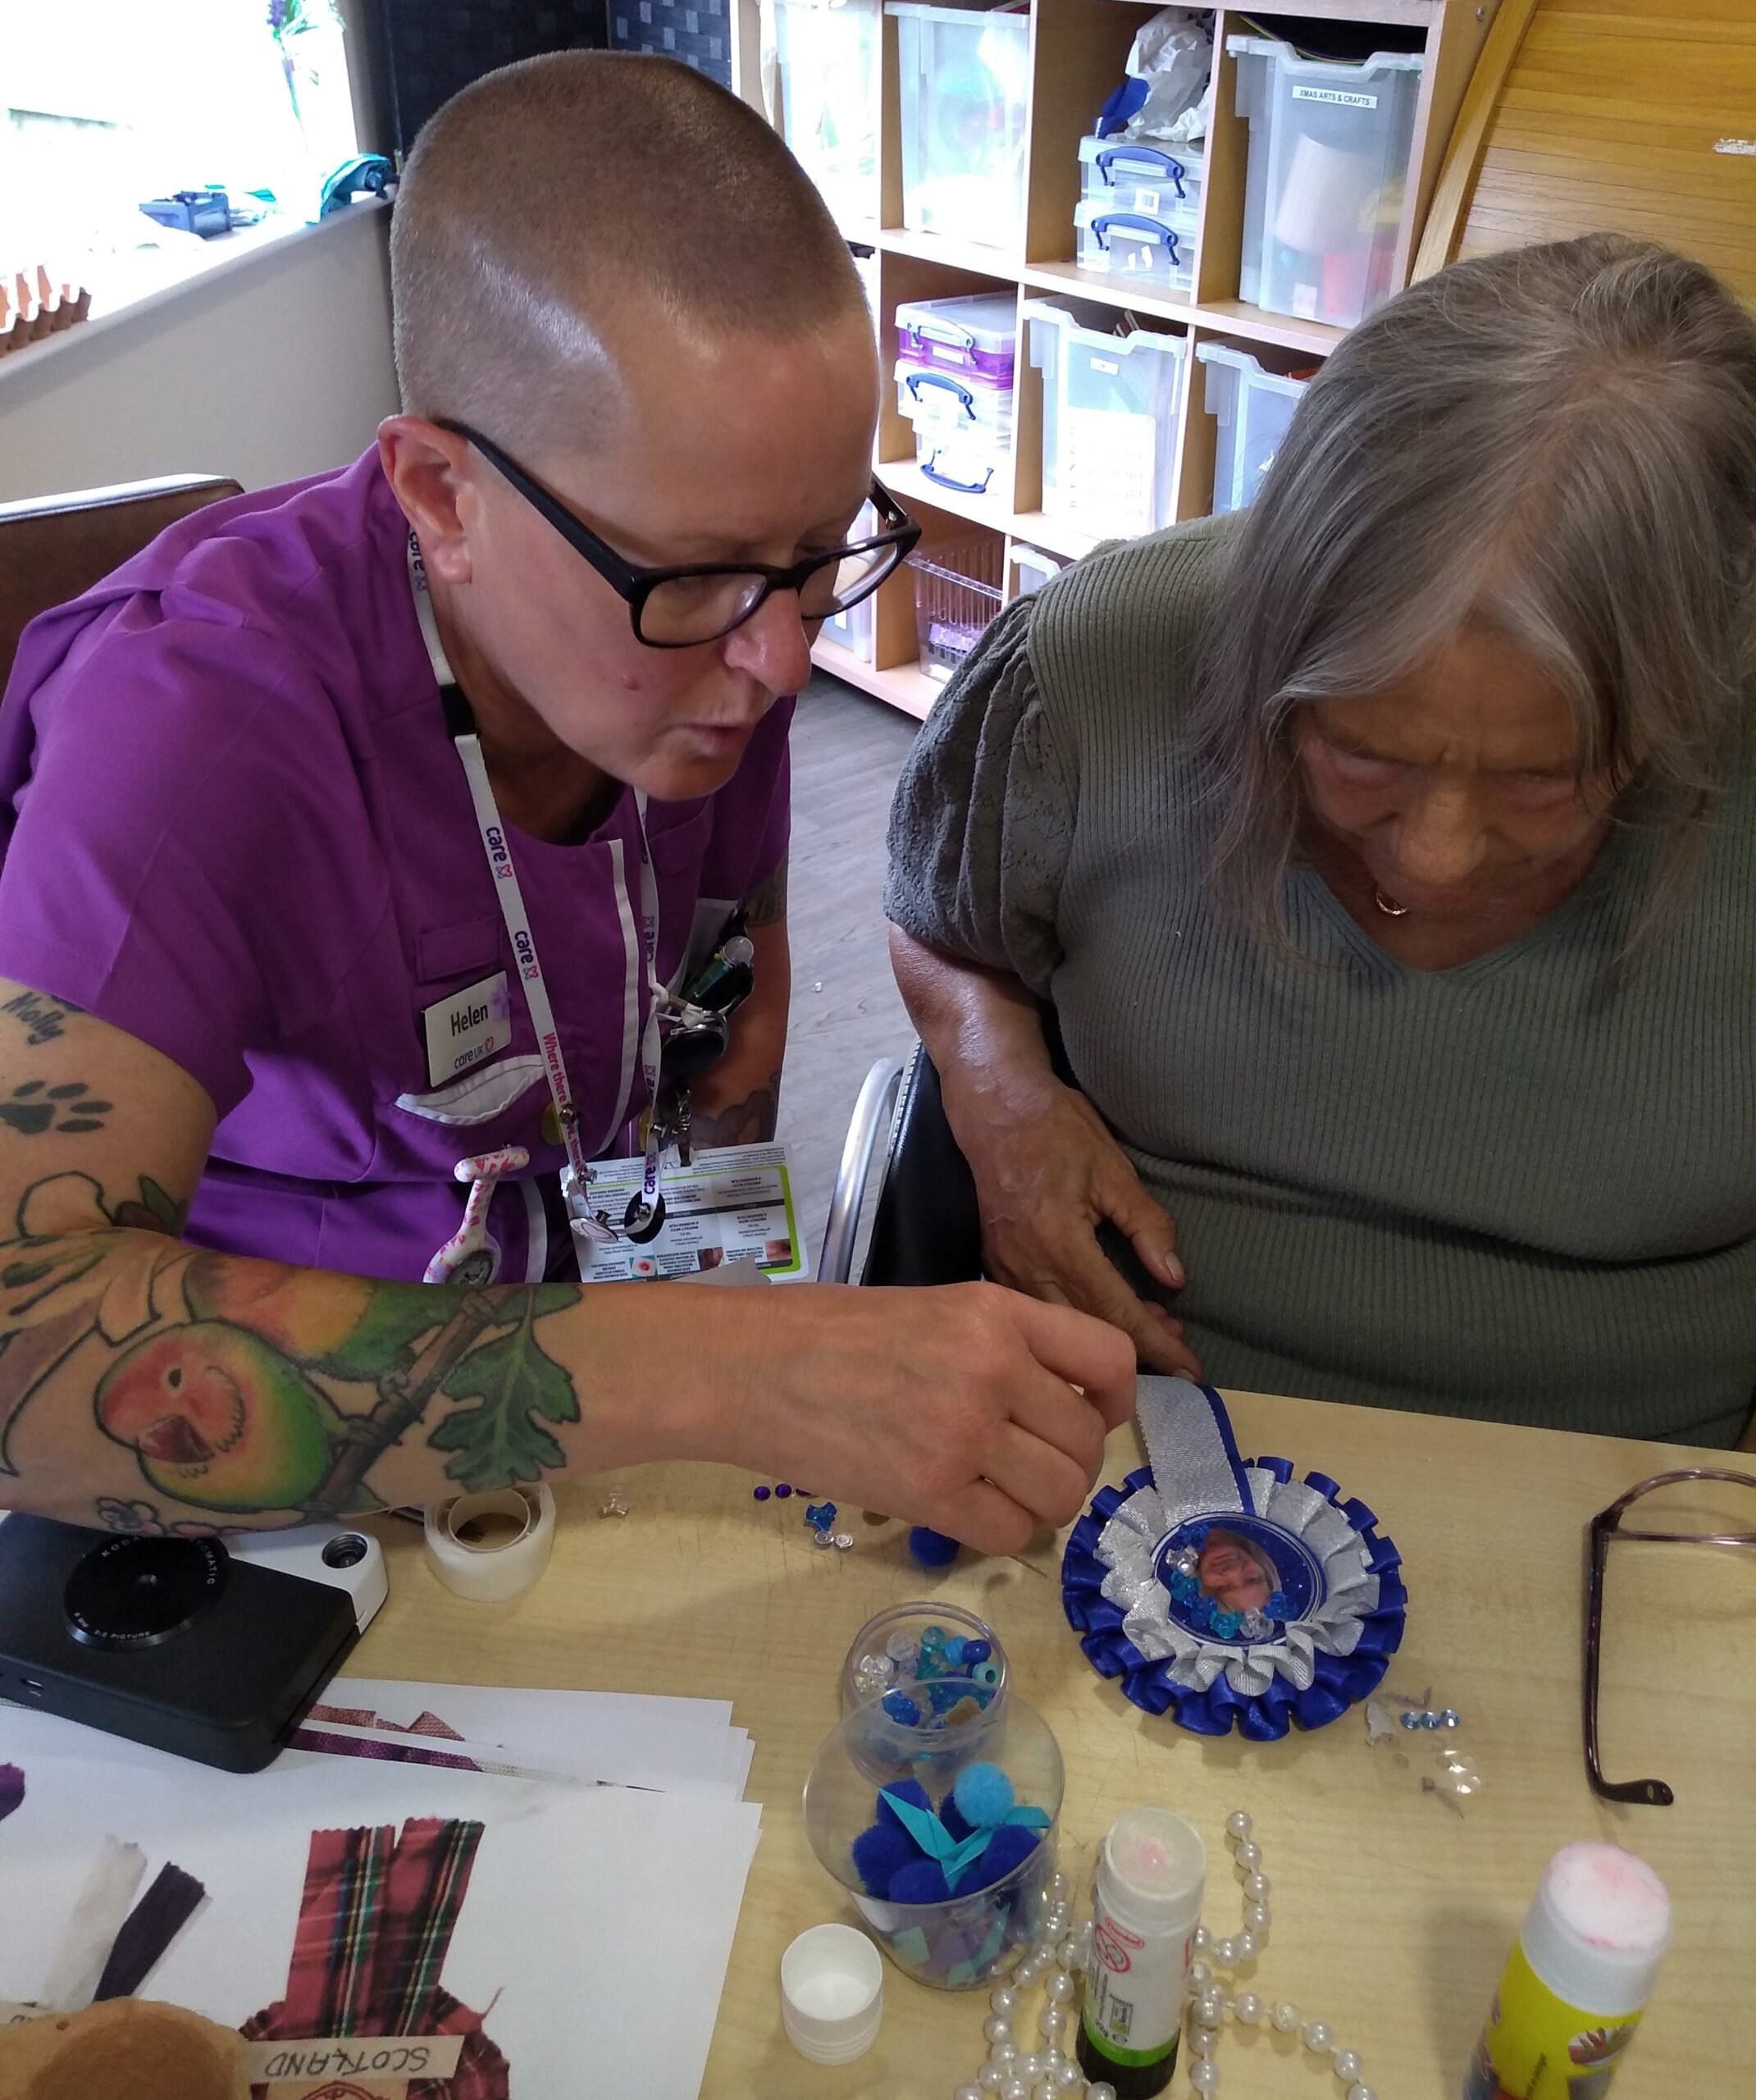 A care worker and participant making a rosette together